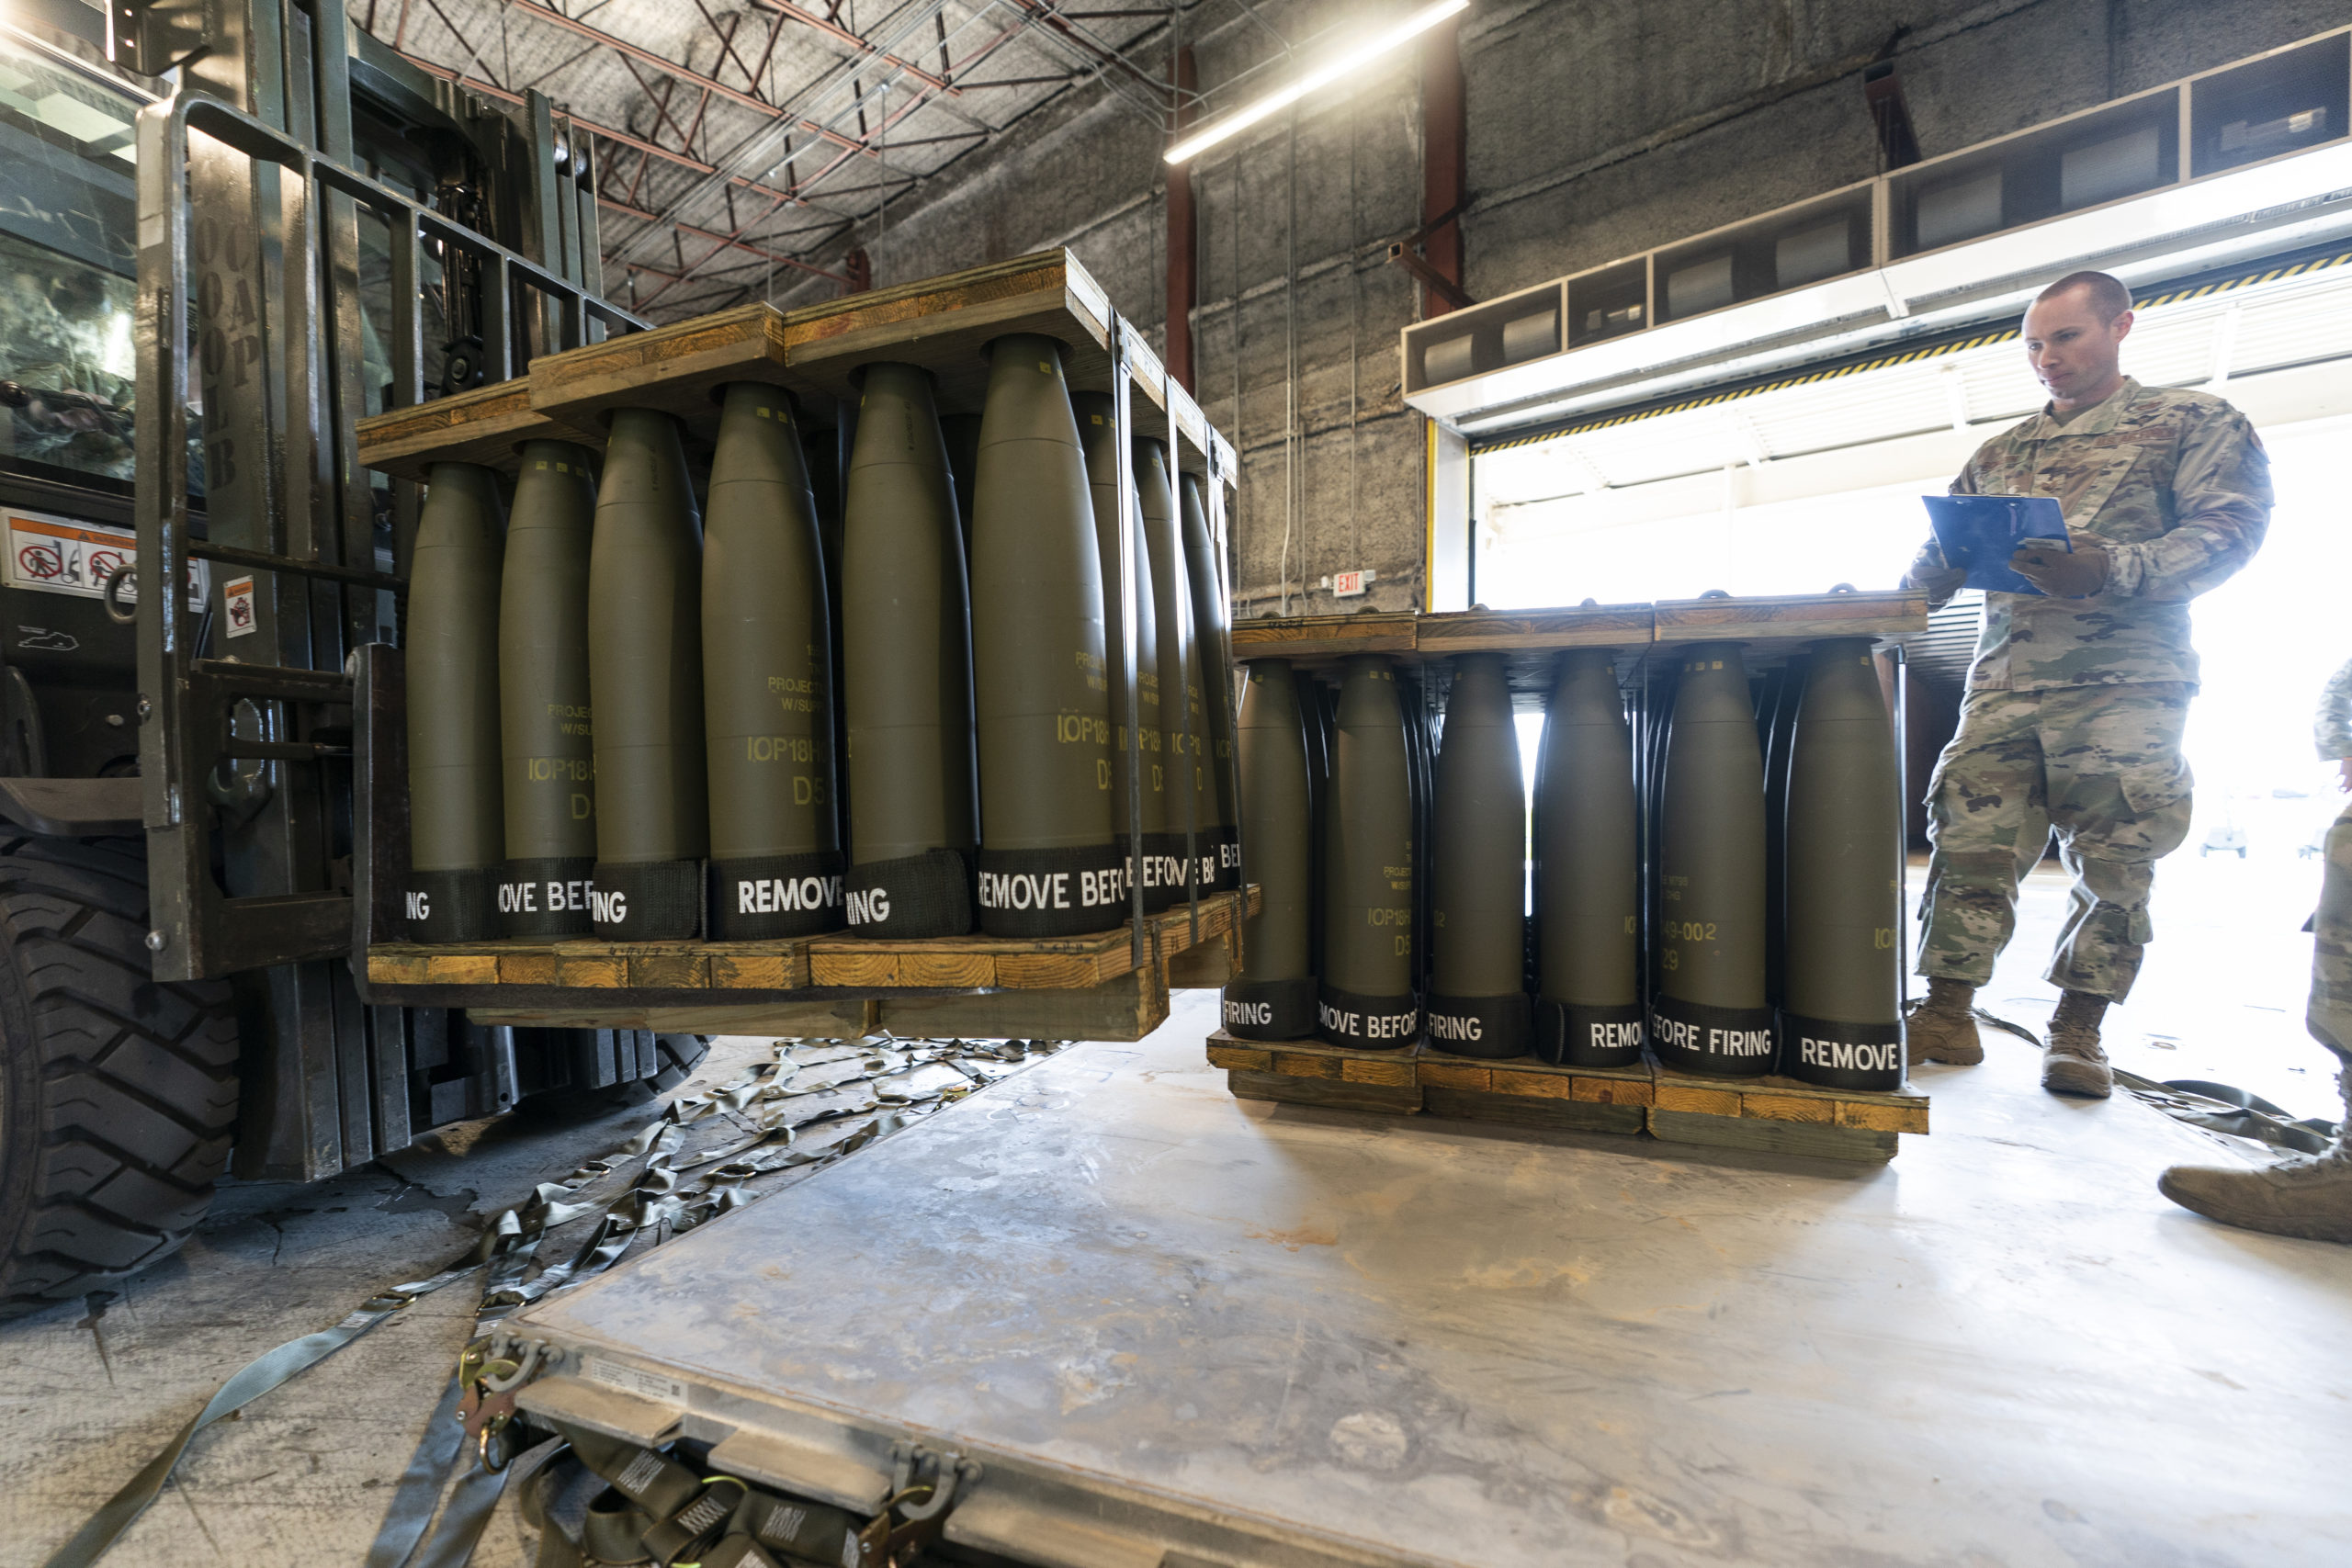 U.S. Air Force Staff Sgt. Cody Brown checks pallets of 155 mm shells bound for Ukraine on Dover Air Force Base, Delaware, on April 29, 2022.